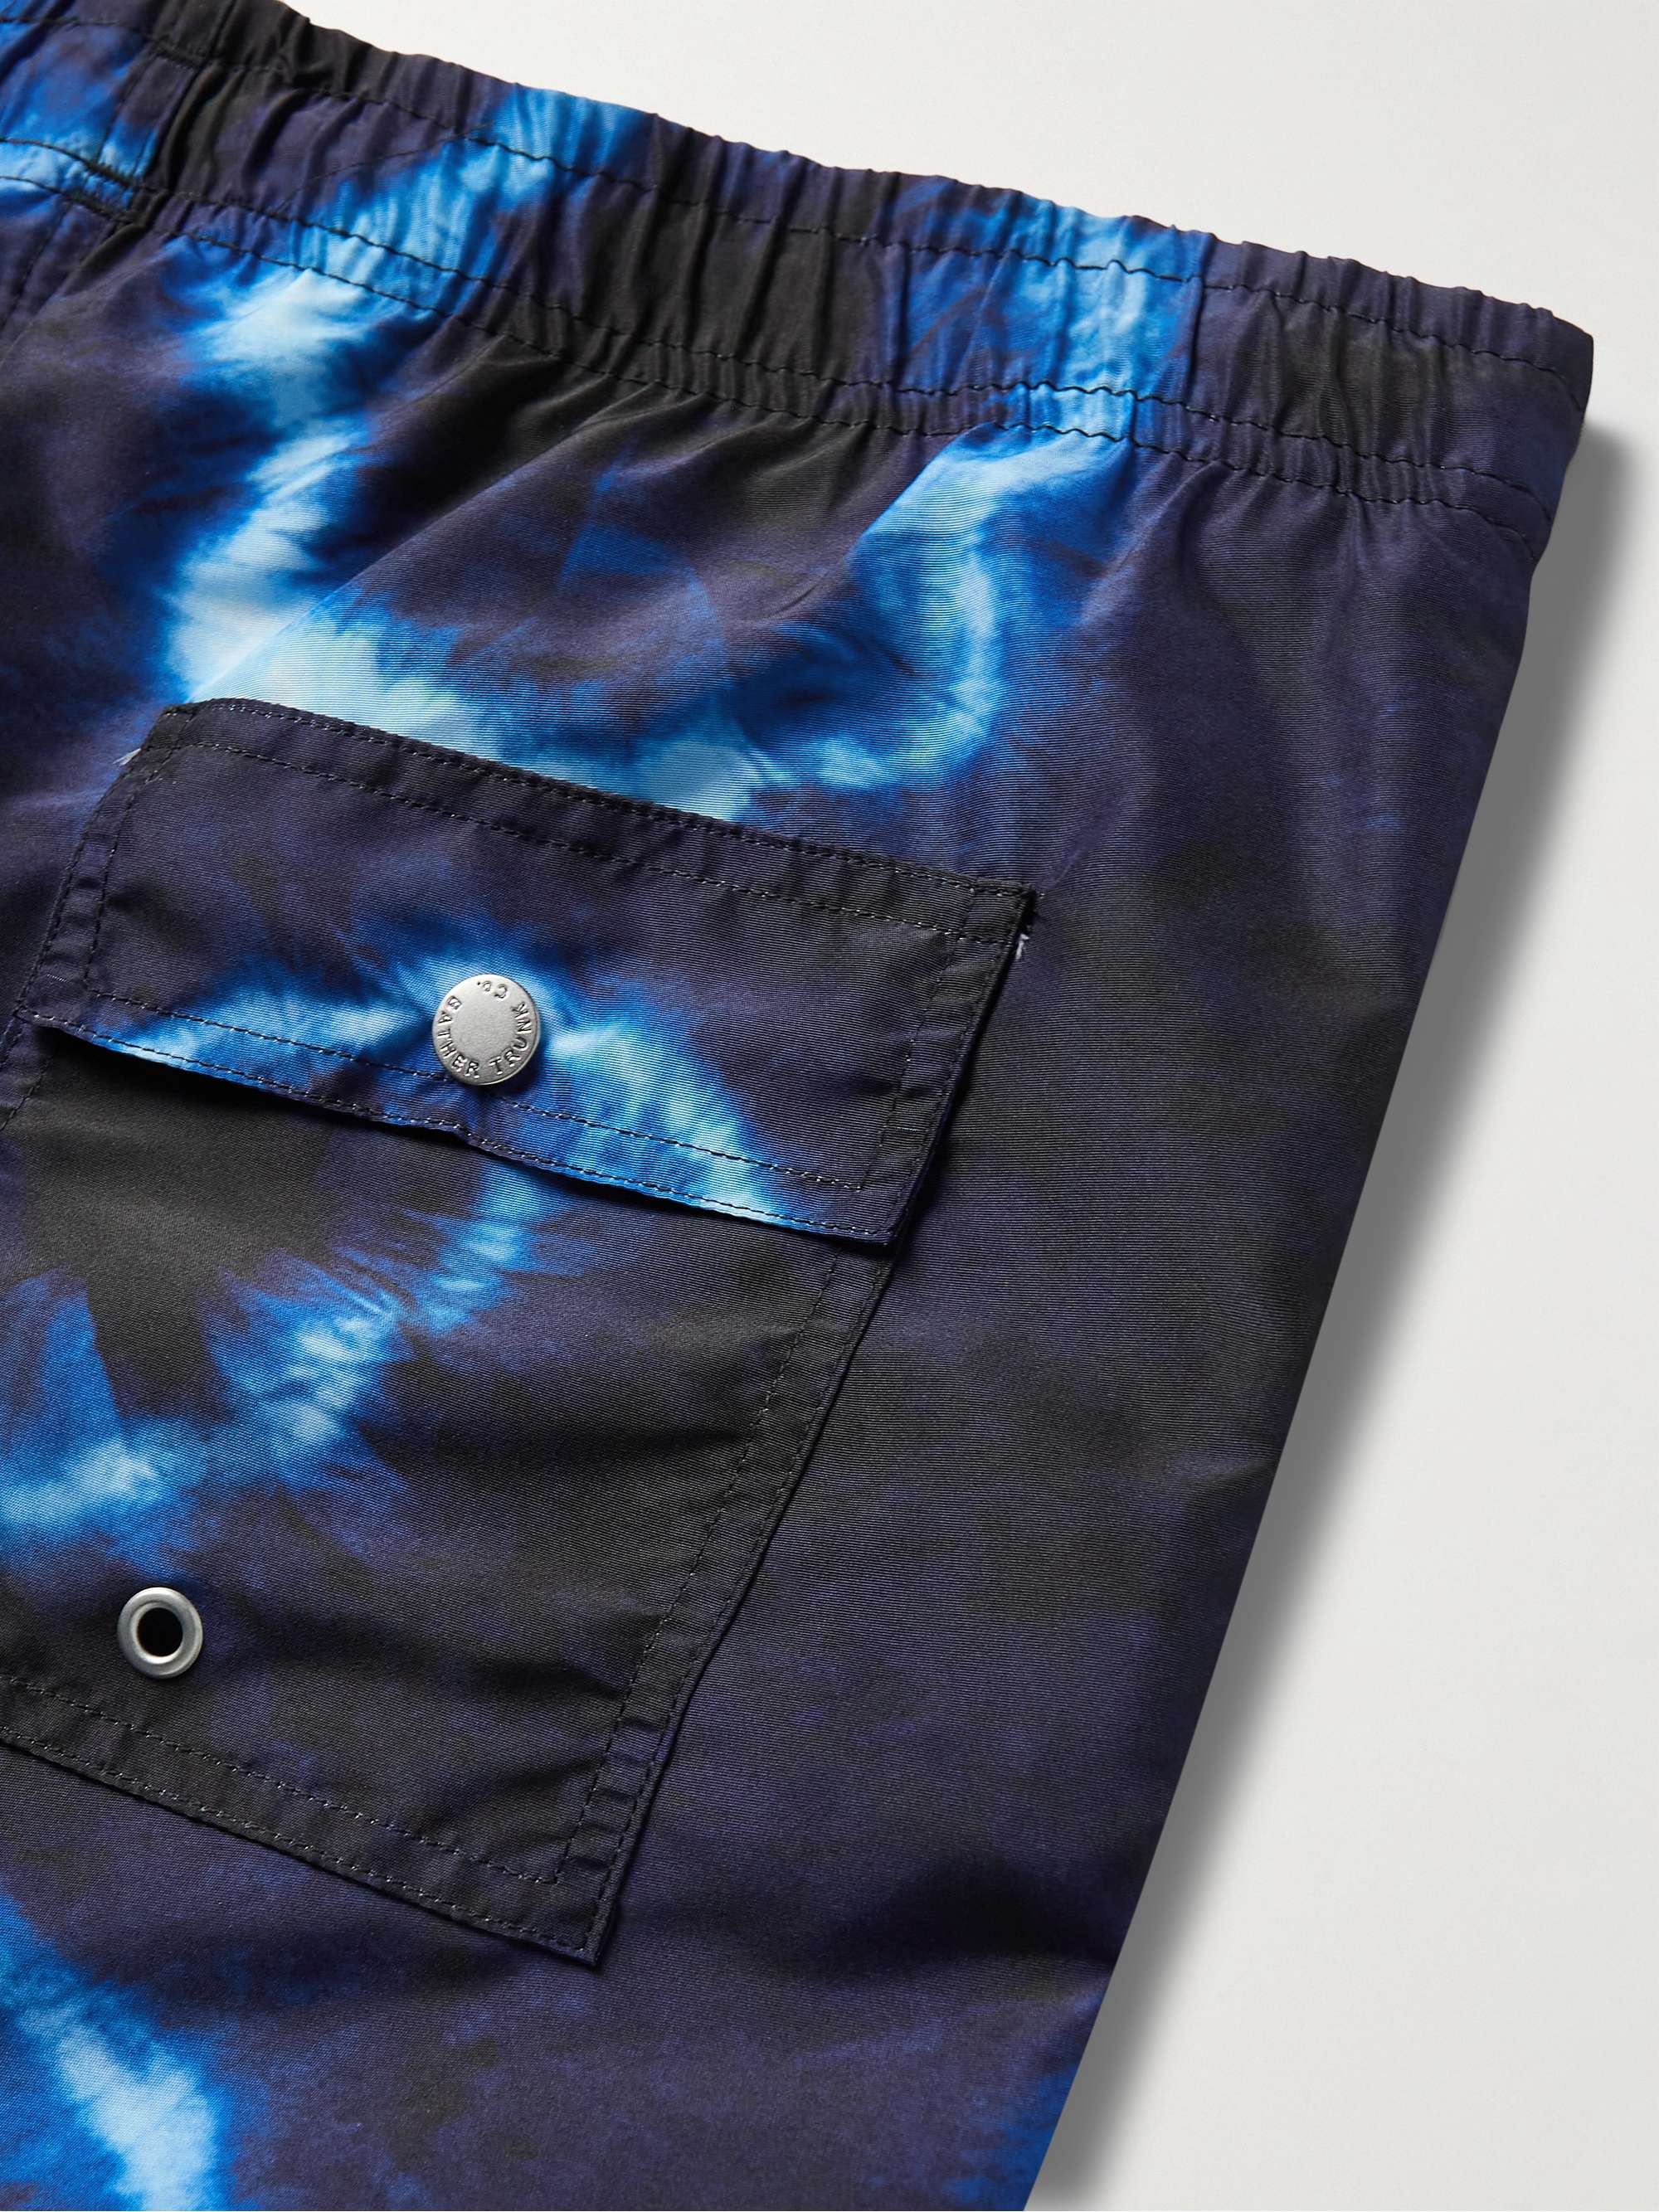 BATHER Straight-Leg Mid-Length Tie-Dyed Recycled Swim Shorts